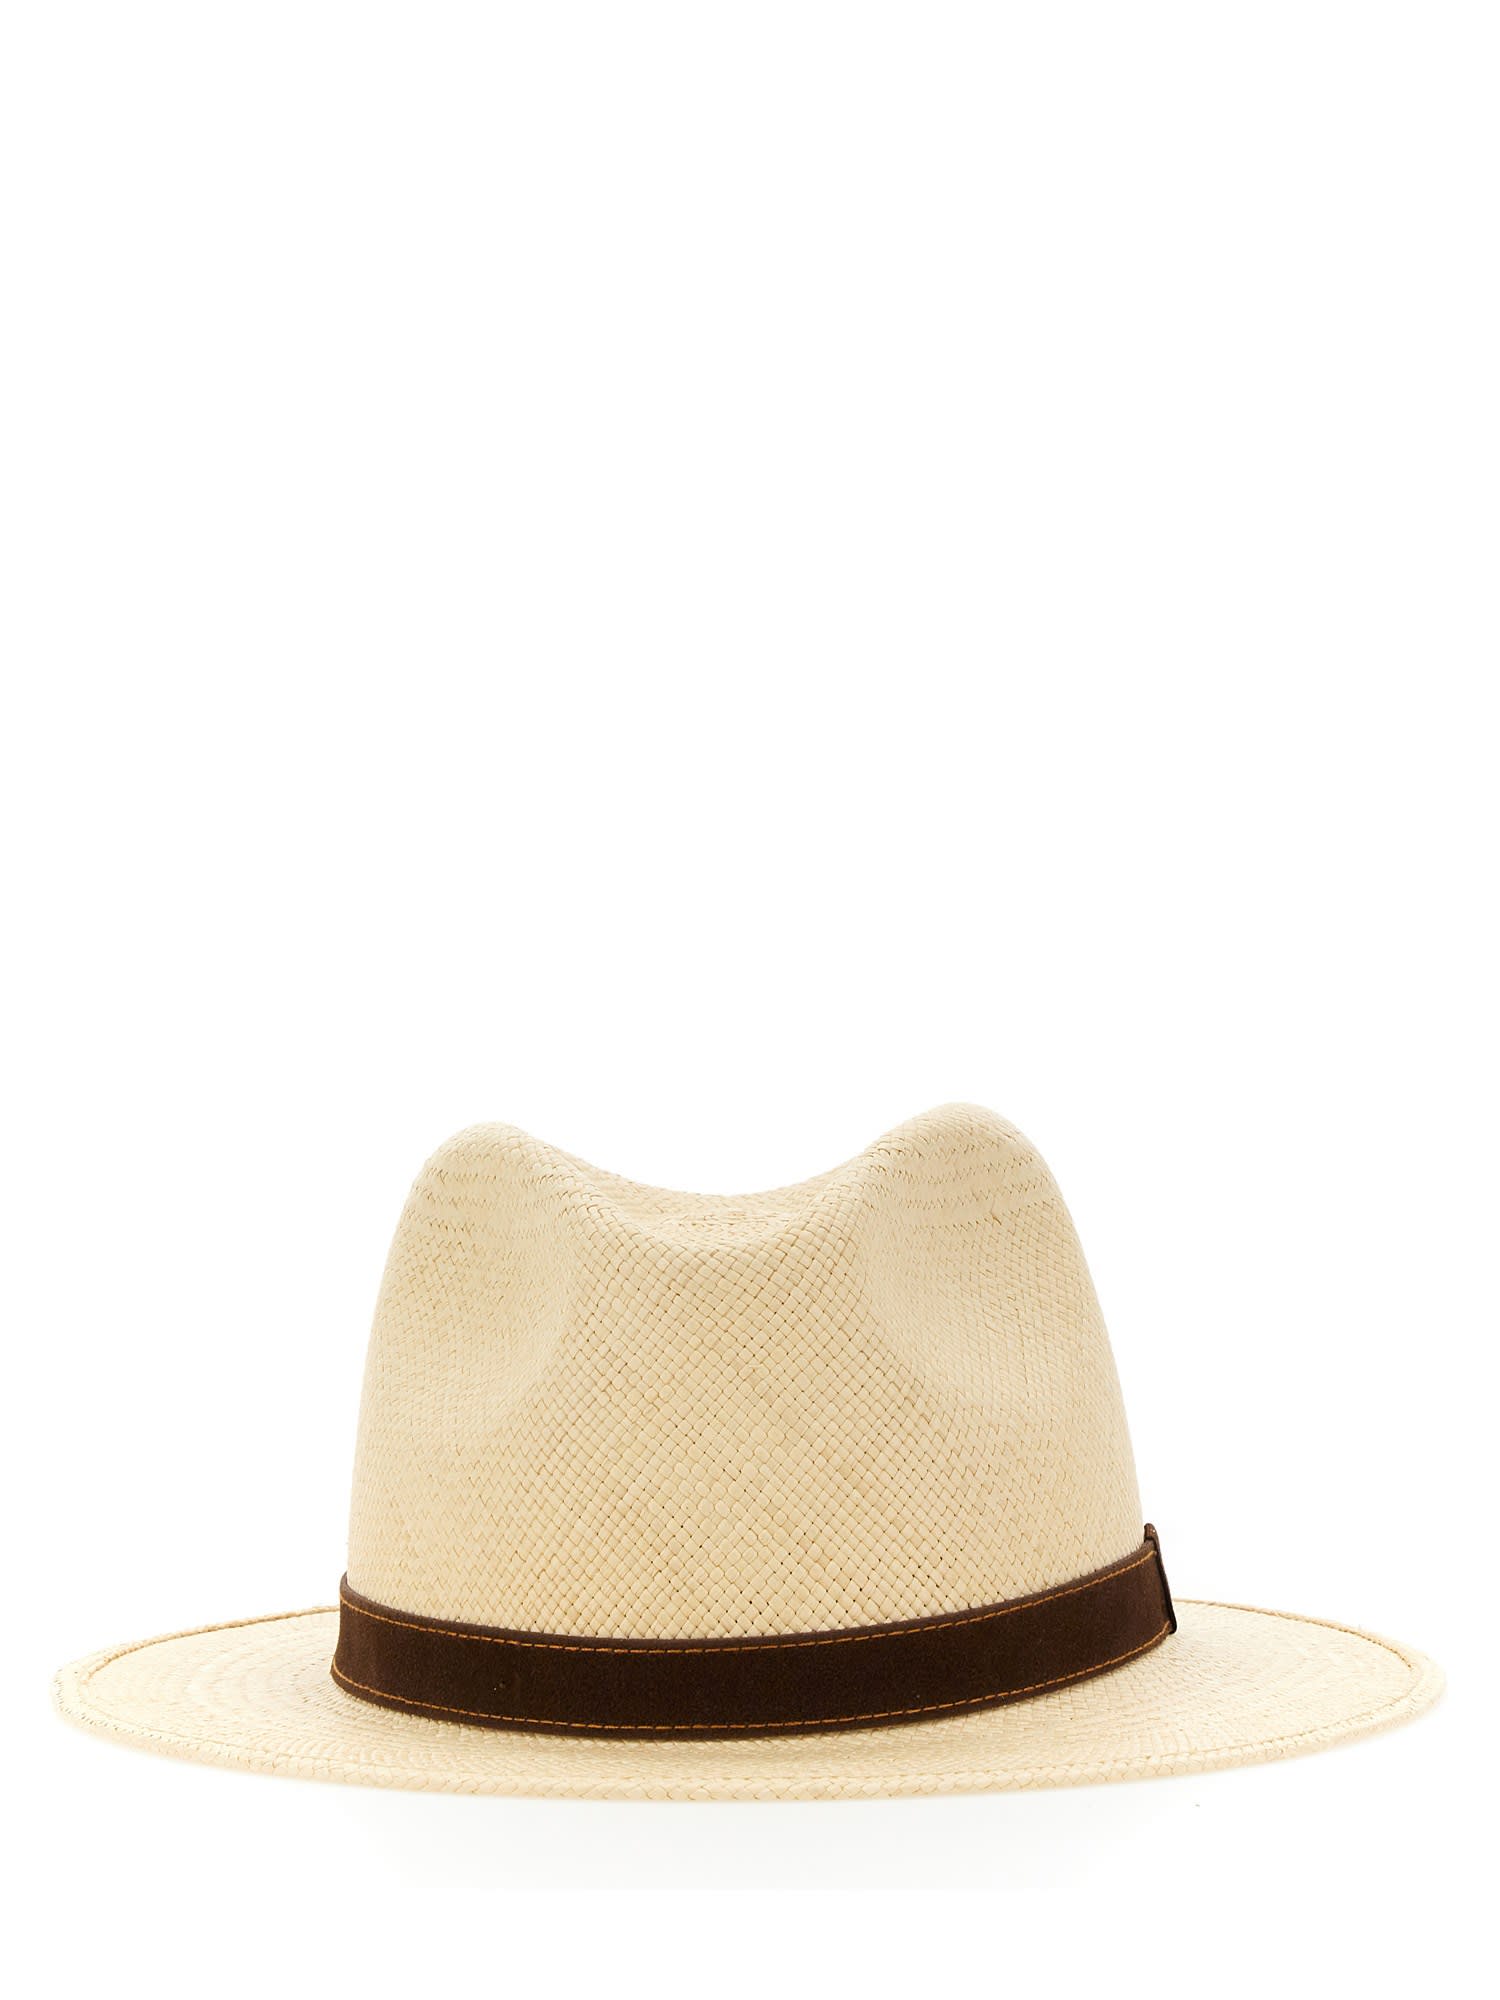 Country Panama Quito Hat